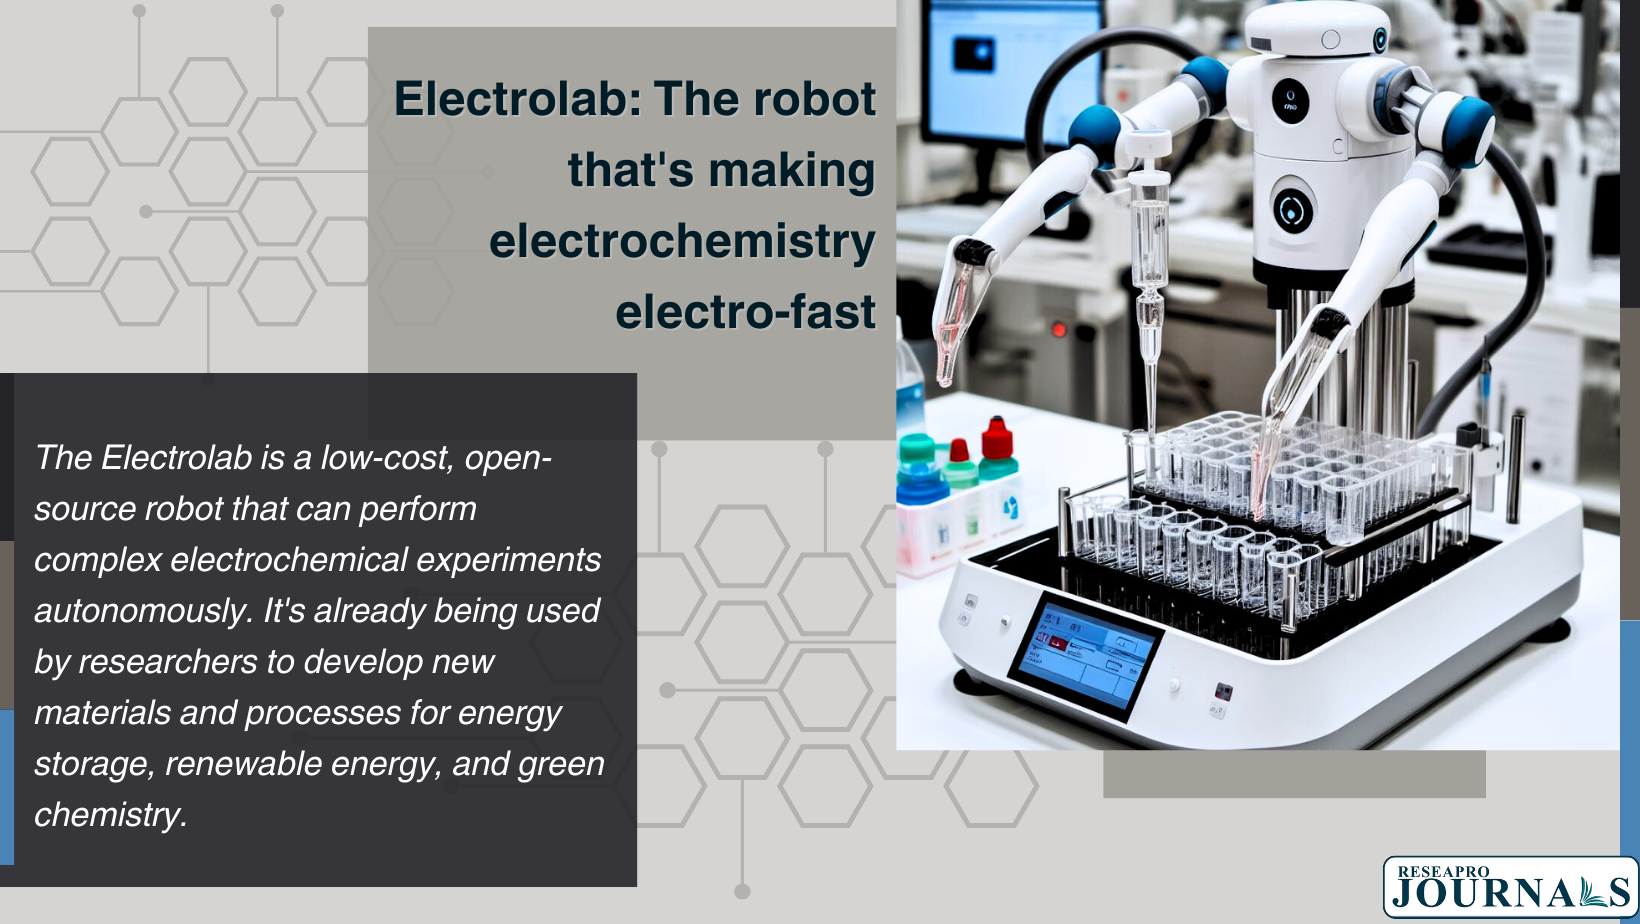 Electrolab: The robot that’s making electrochemistry electro-fast